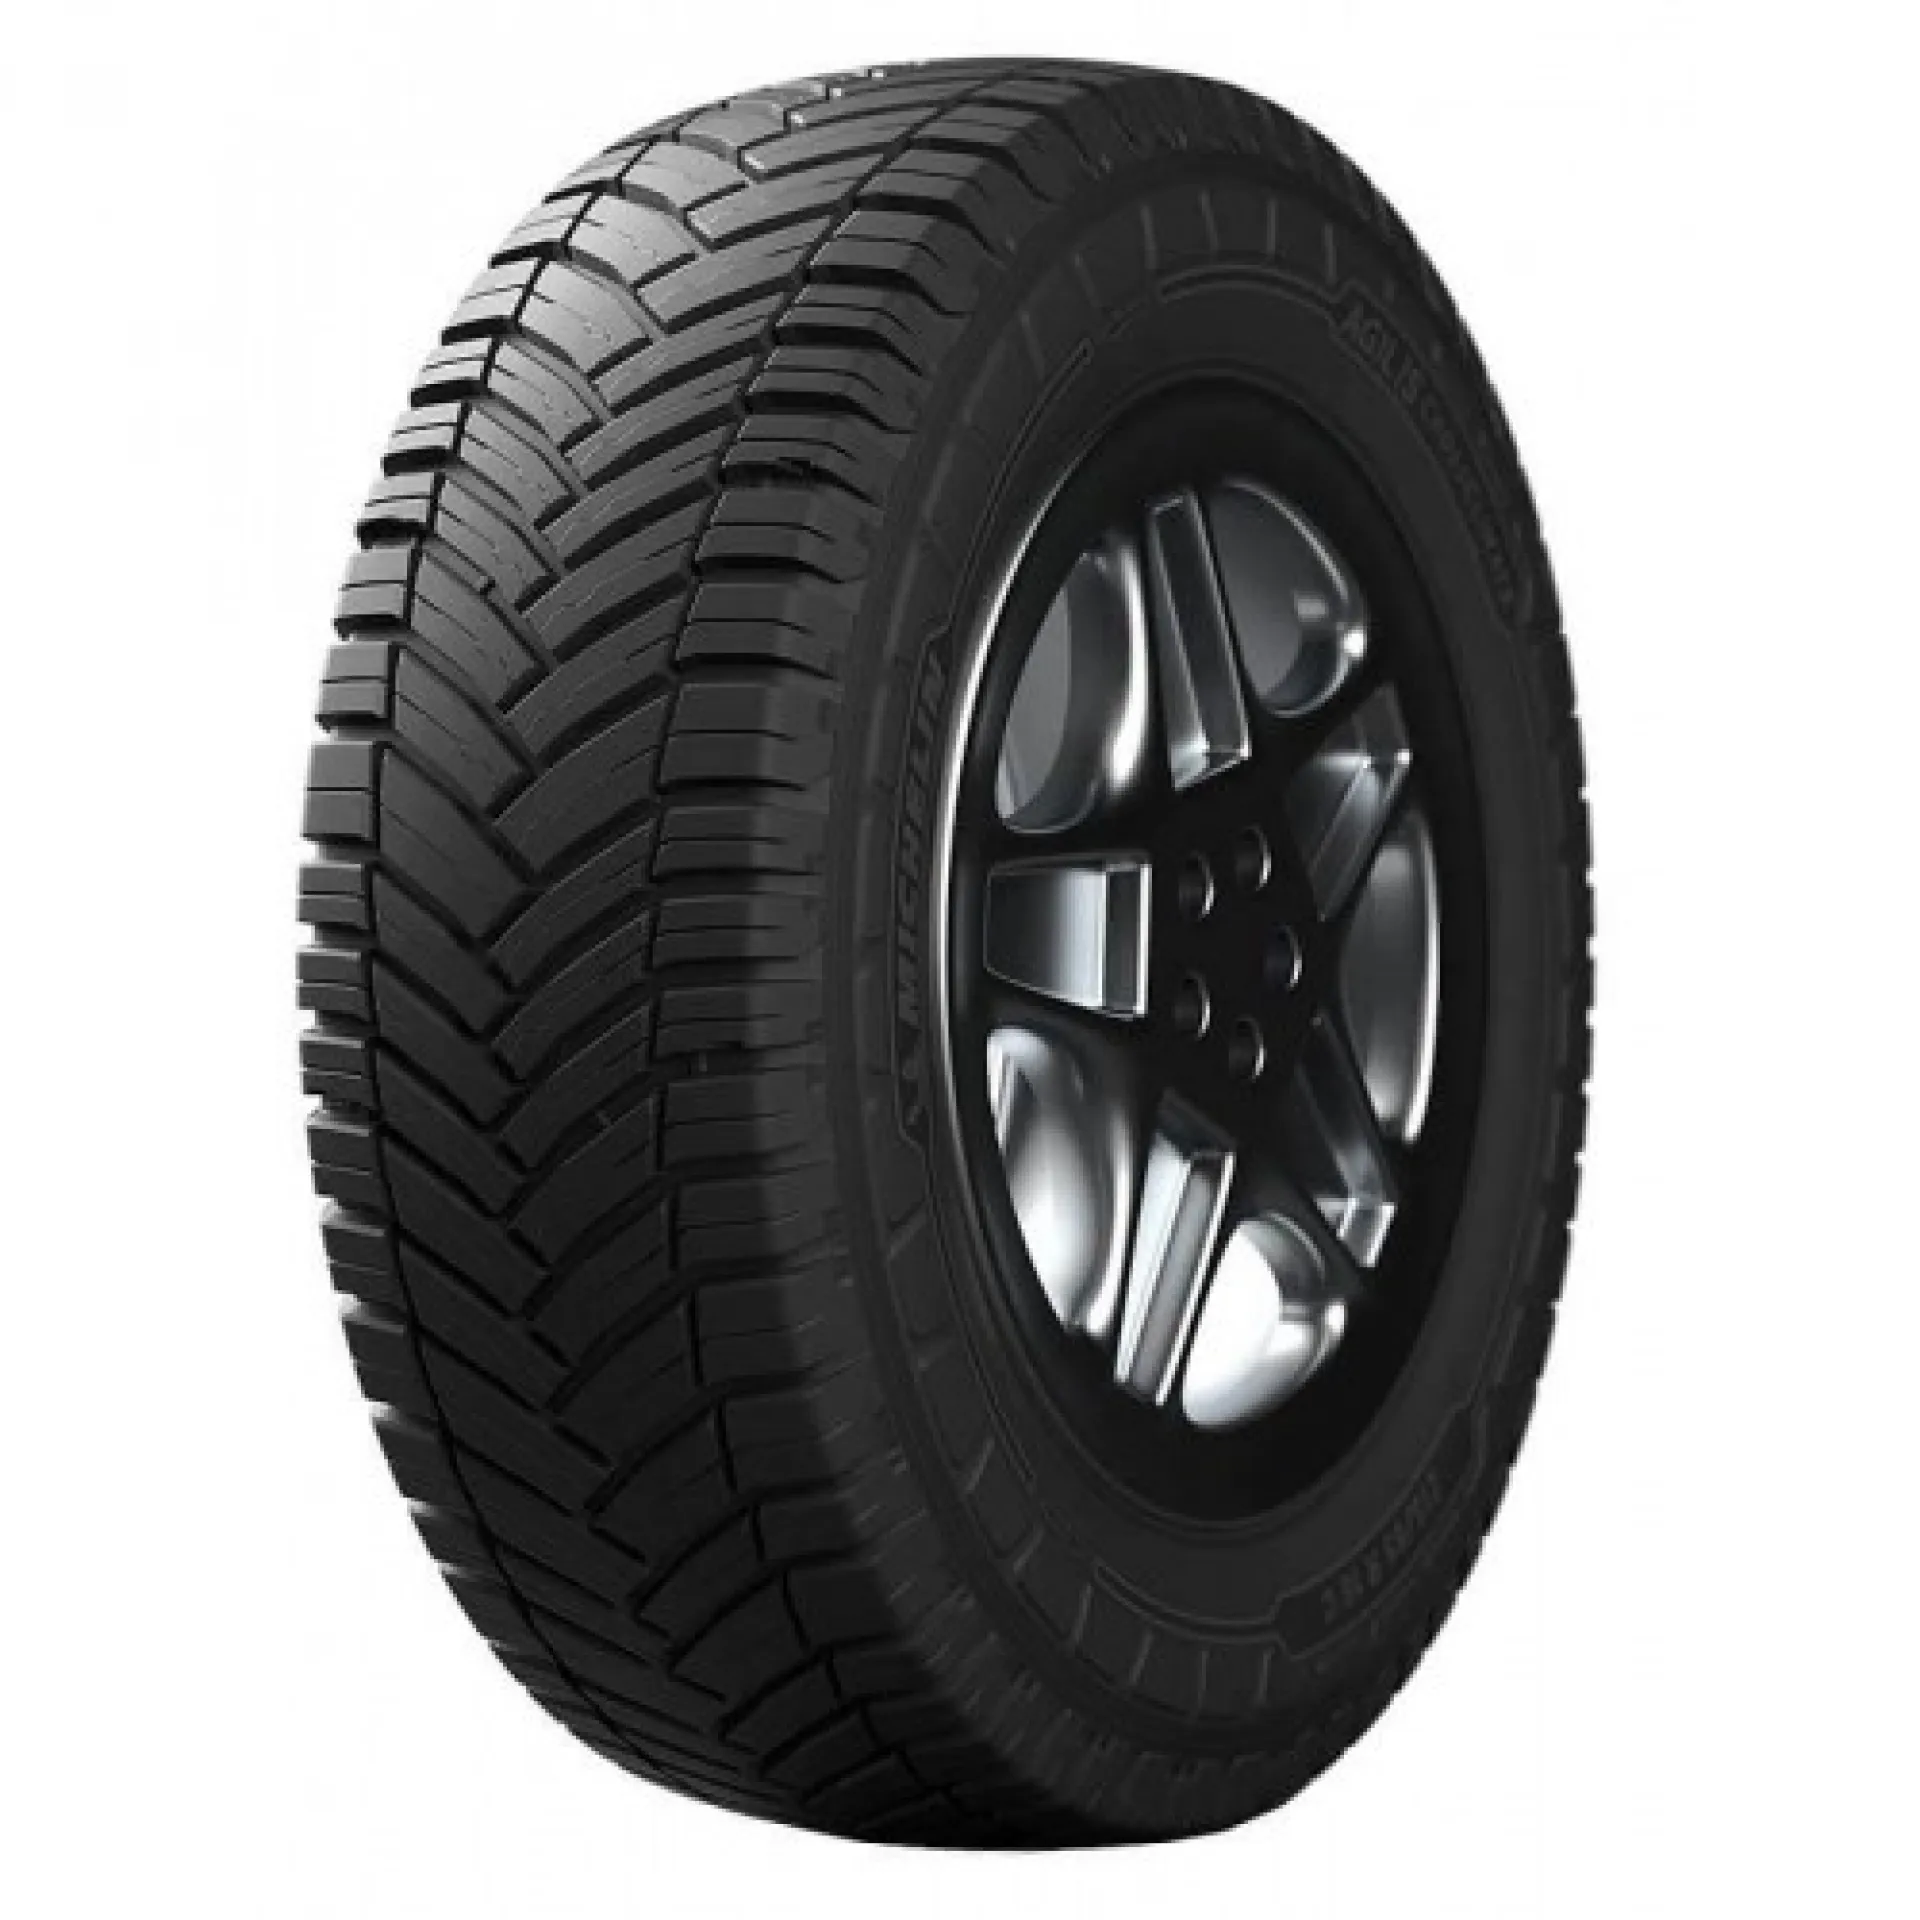 Michelin Agilis CrossClimate - Tire Reviews and Tests